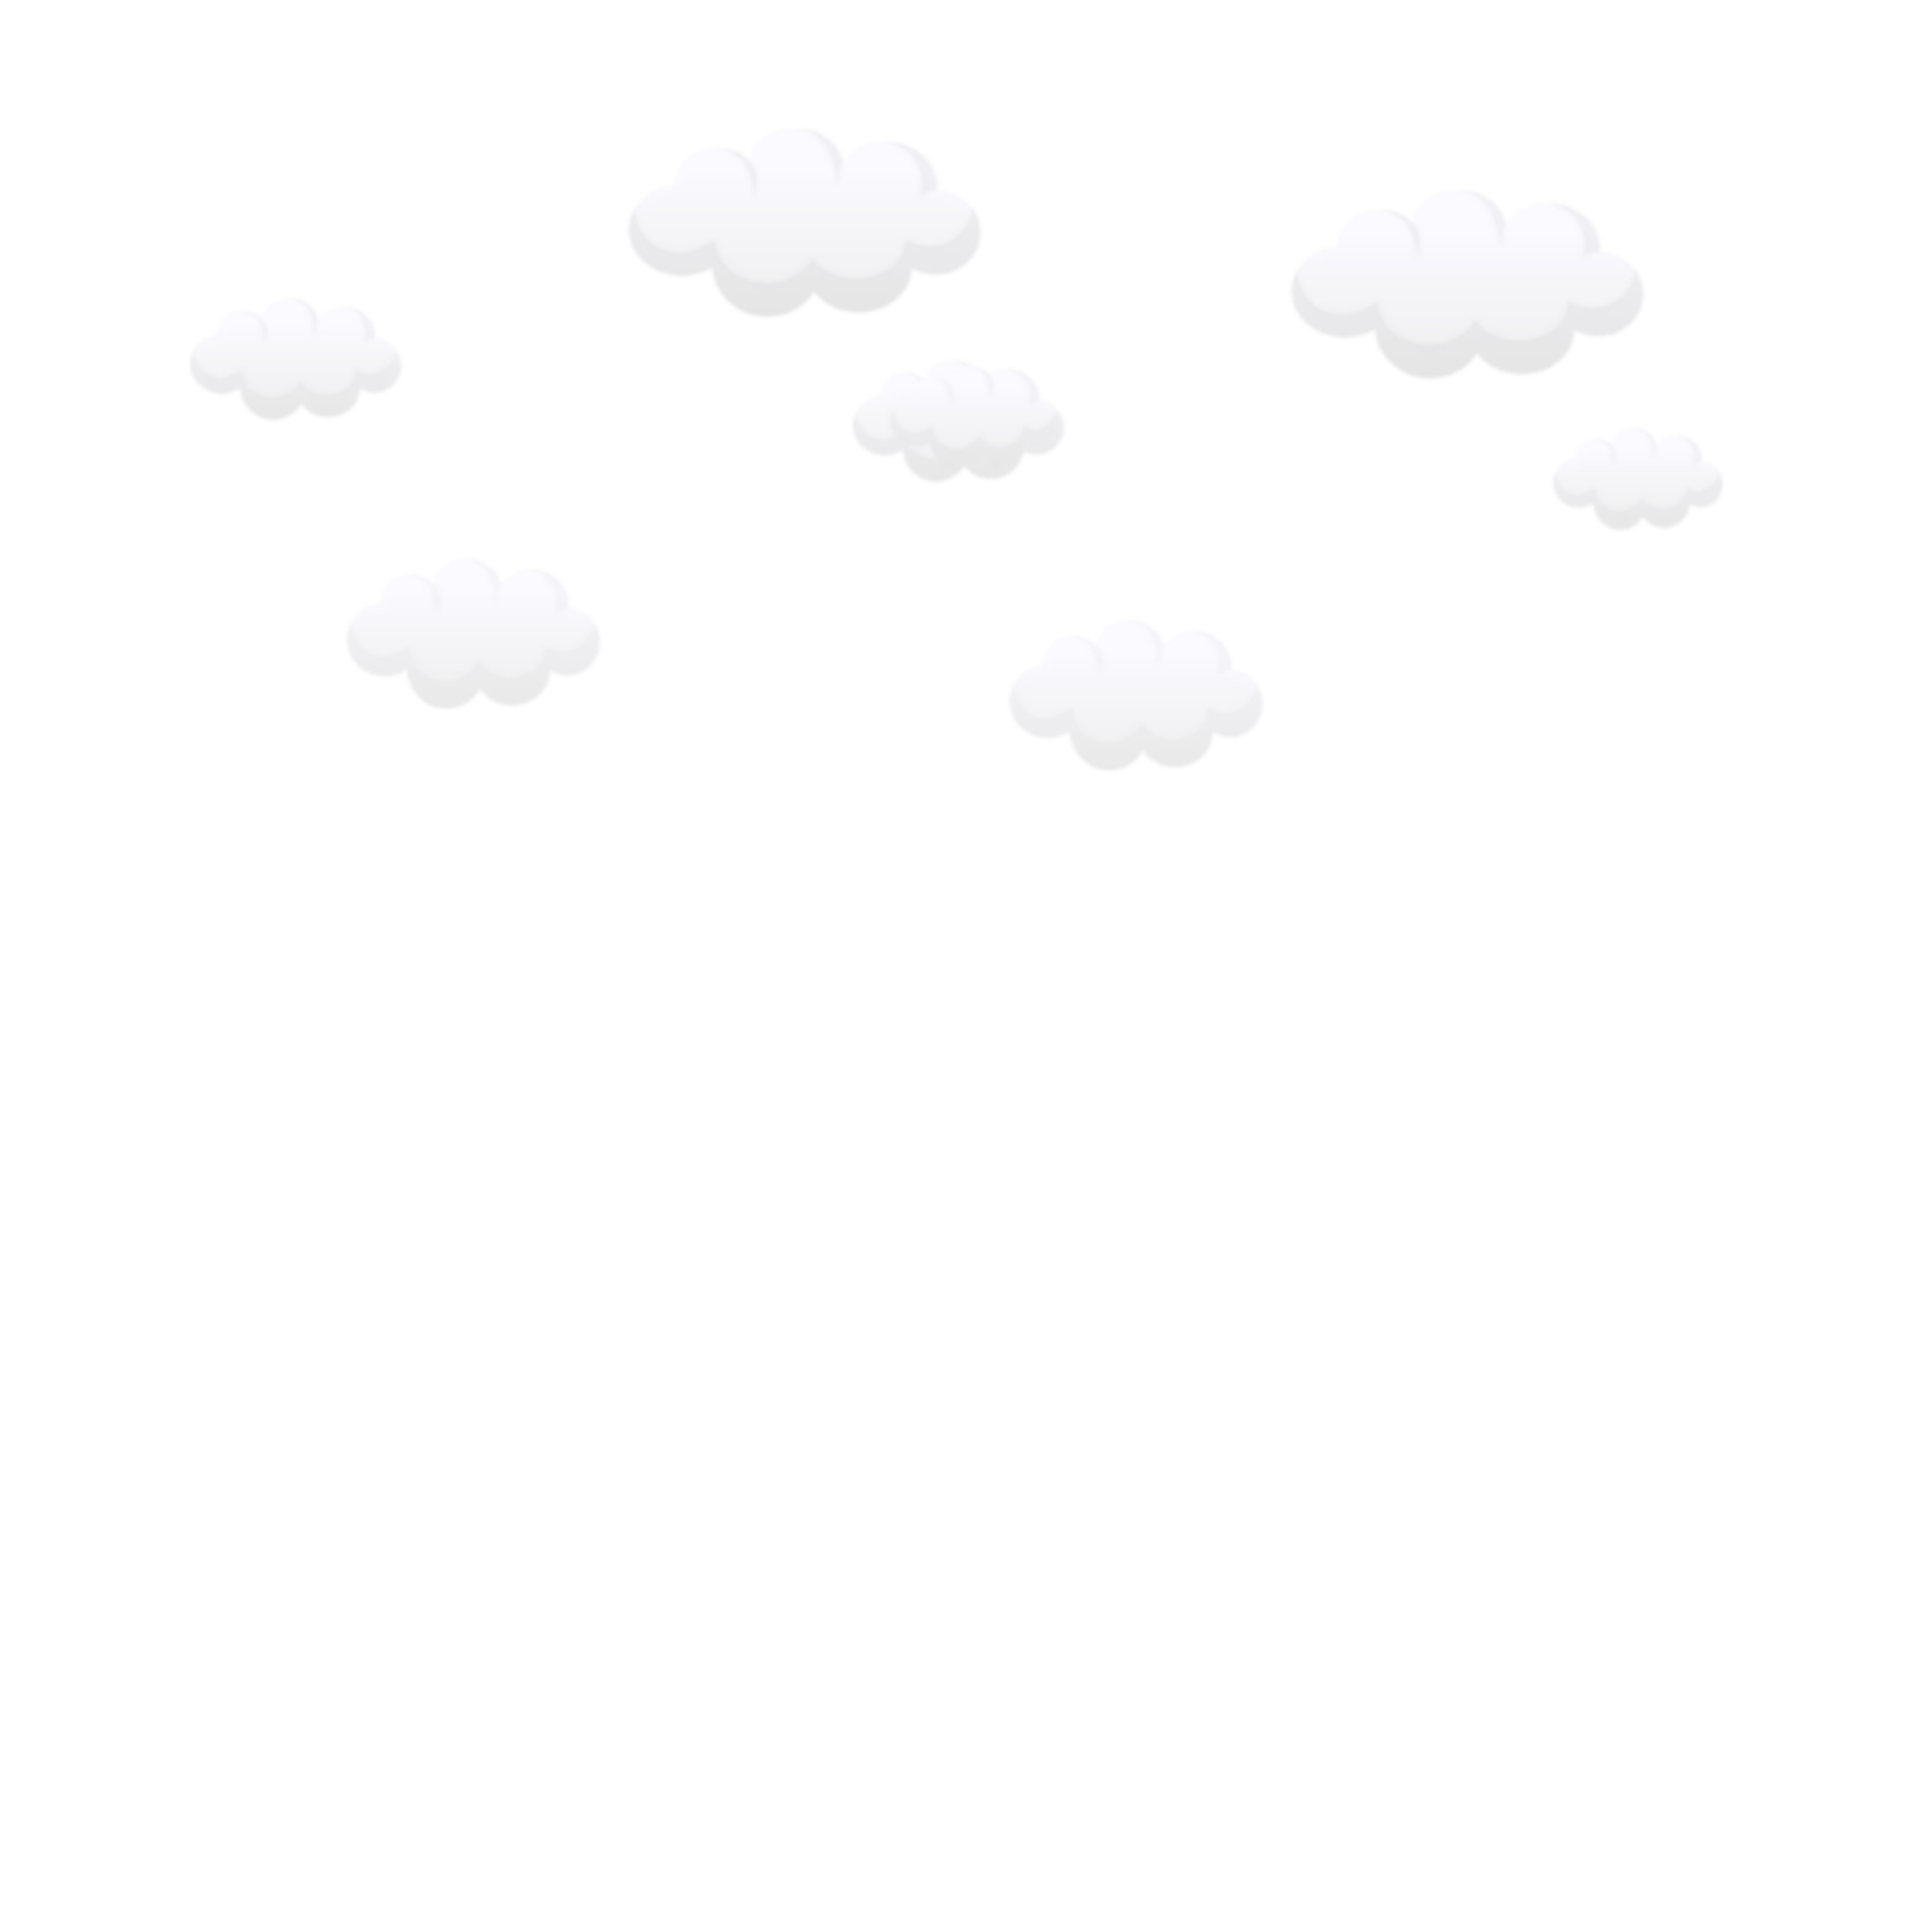 clouds freetoedit #clouds sticker by @leejaded7